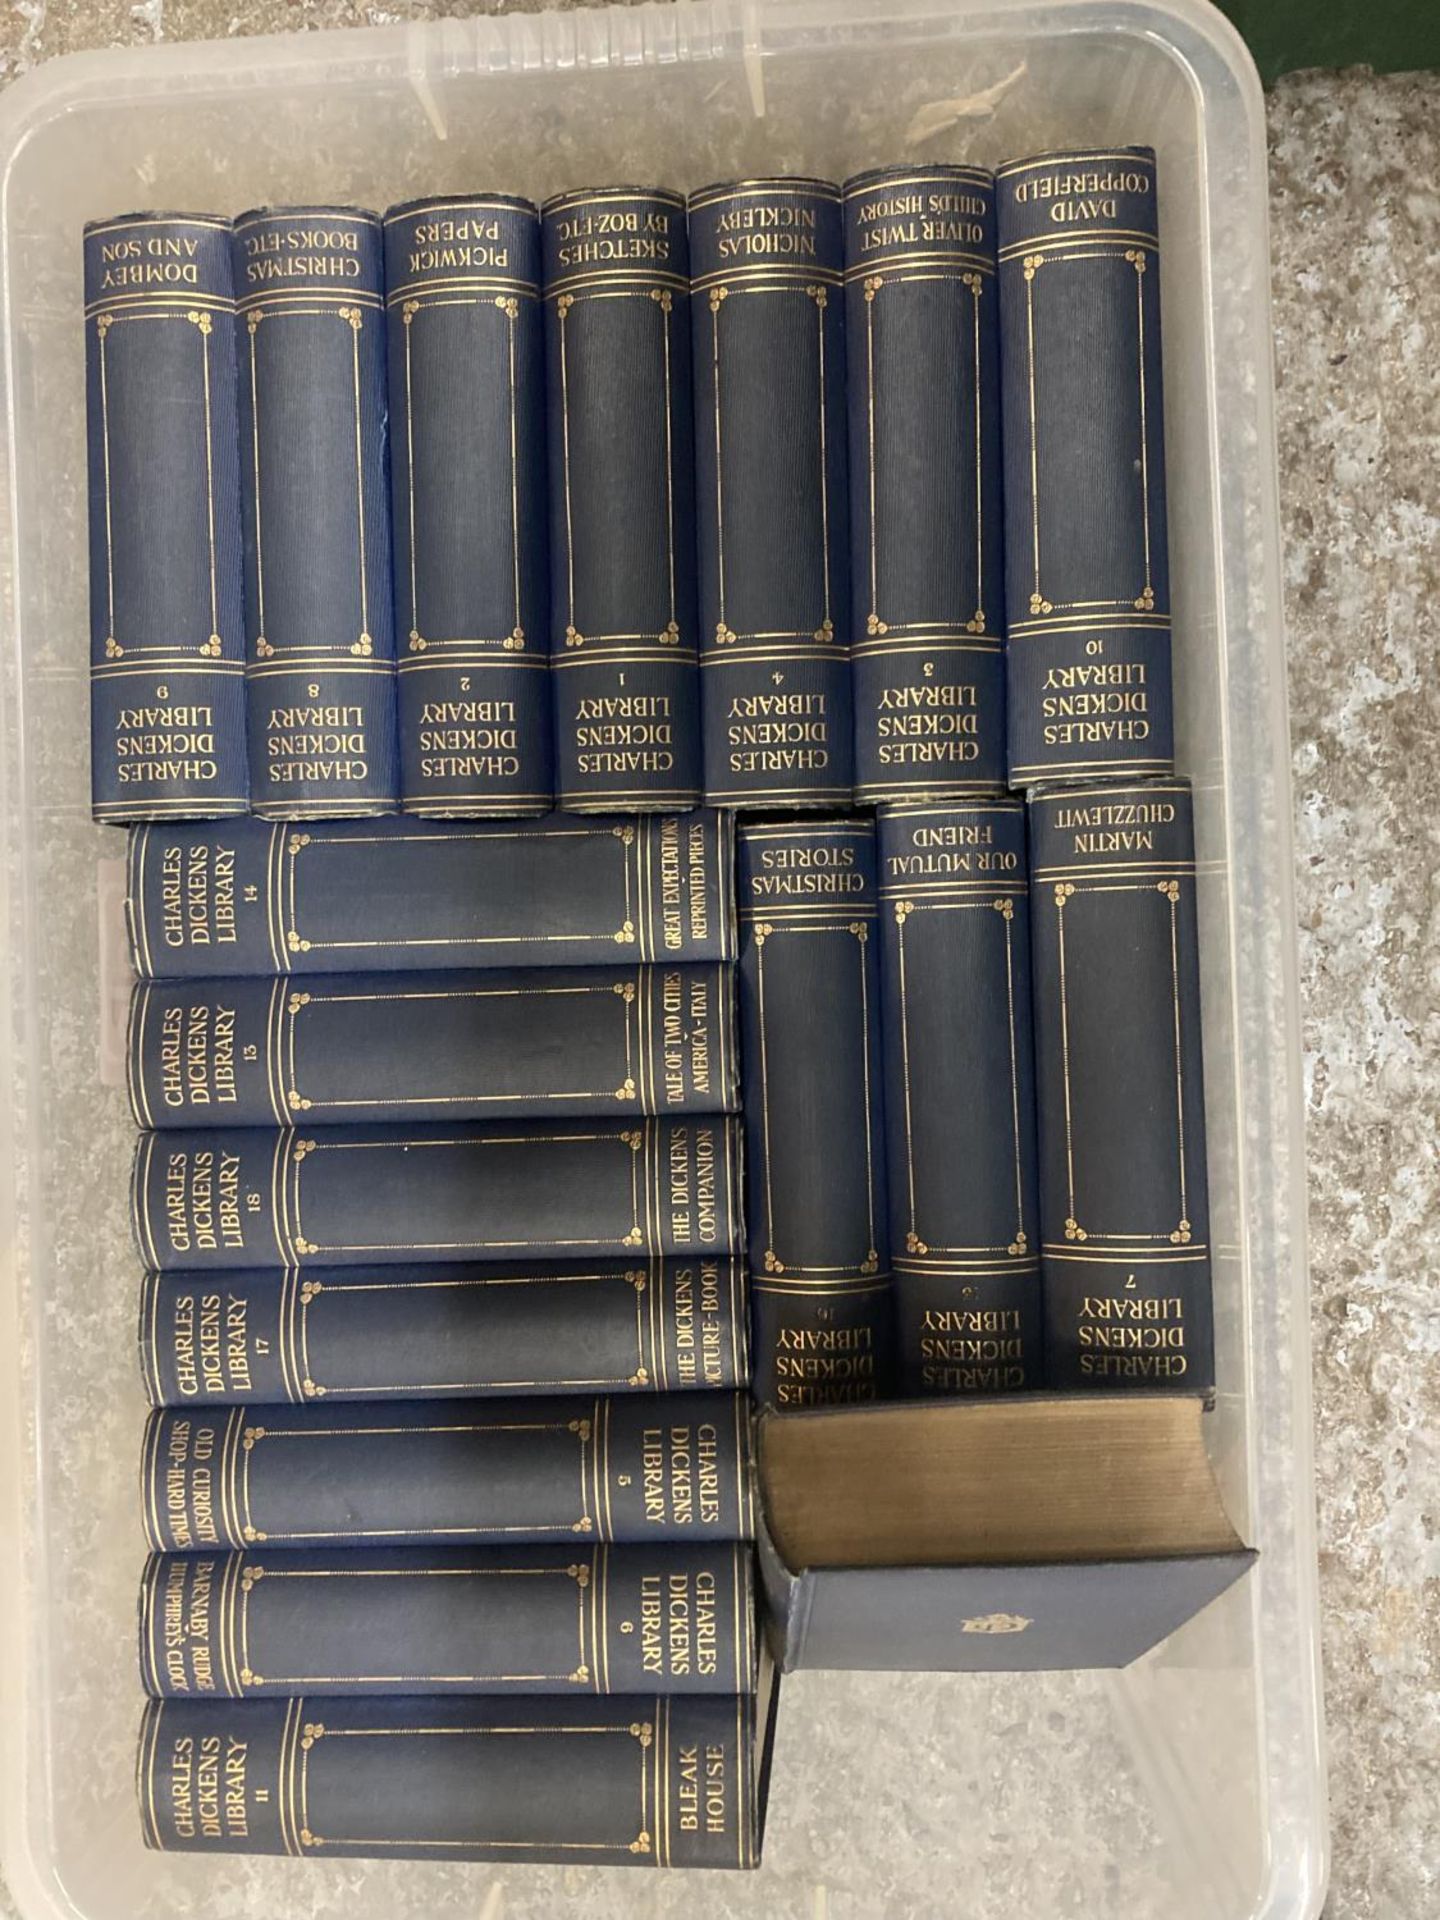 A COLLECTION OF VINTAGE HARDBACK CHARLES DICKENS BOOKS - 18 IN TOTAL